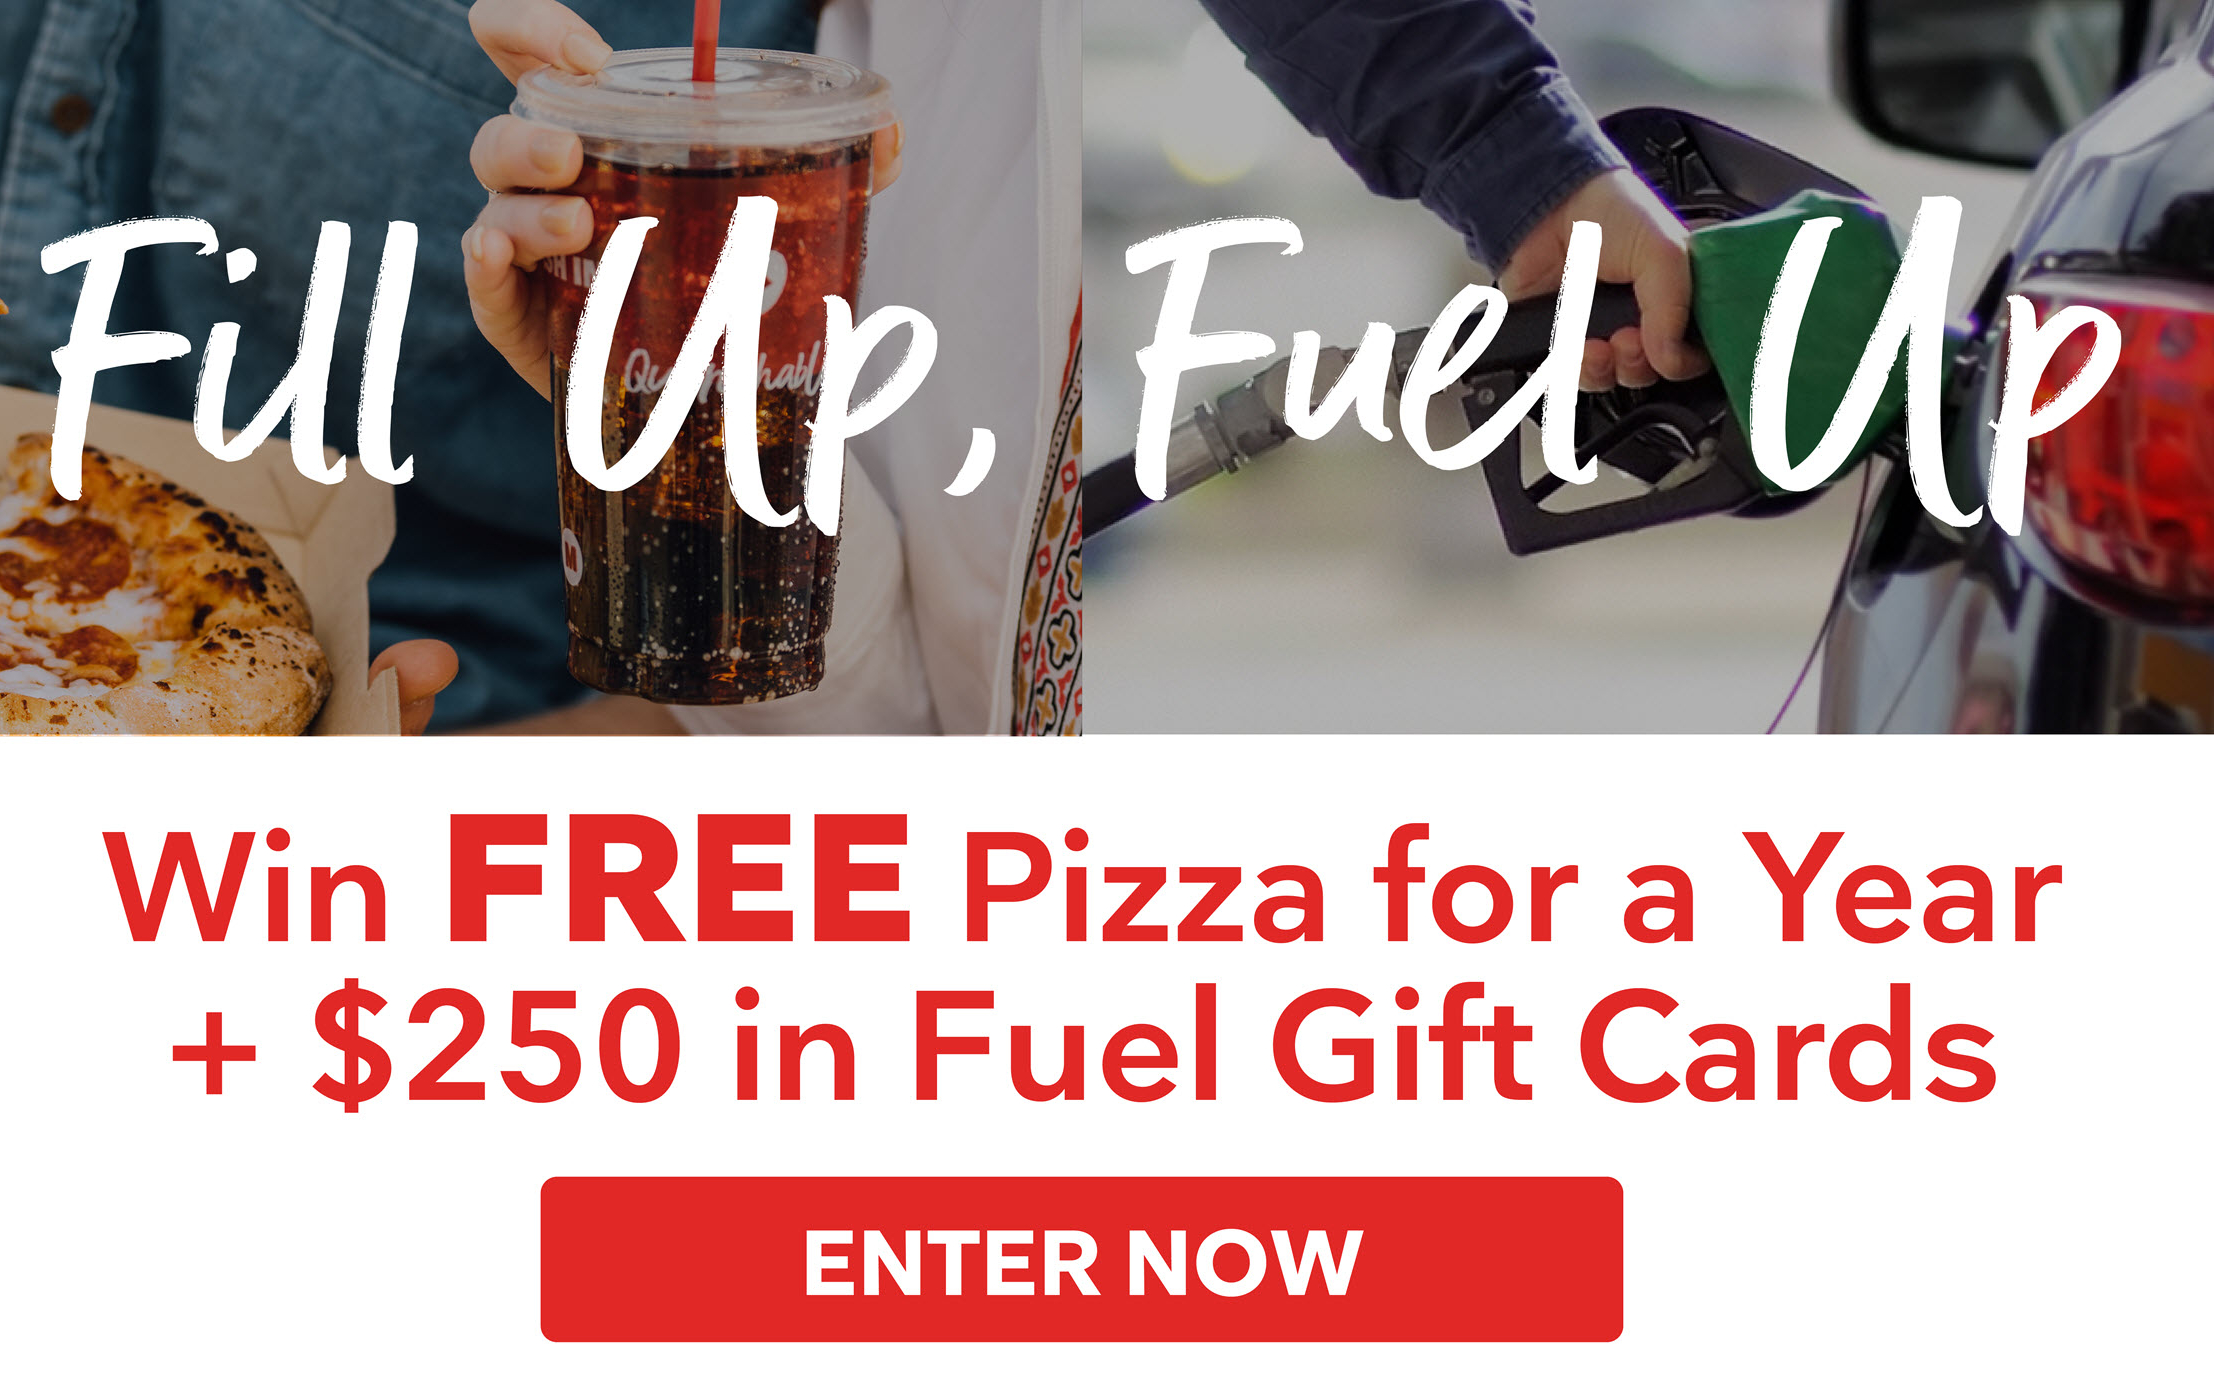 Fill Up, Fuel Up Contest